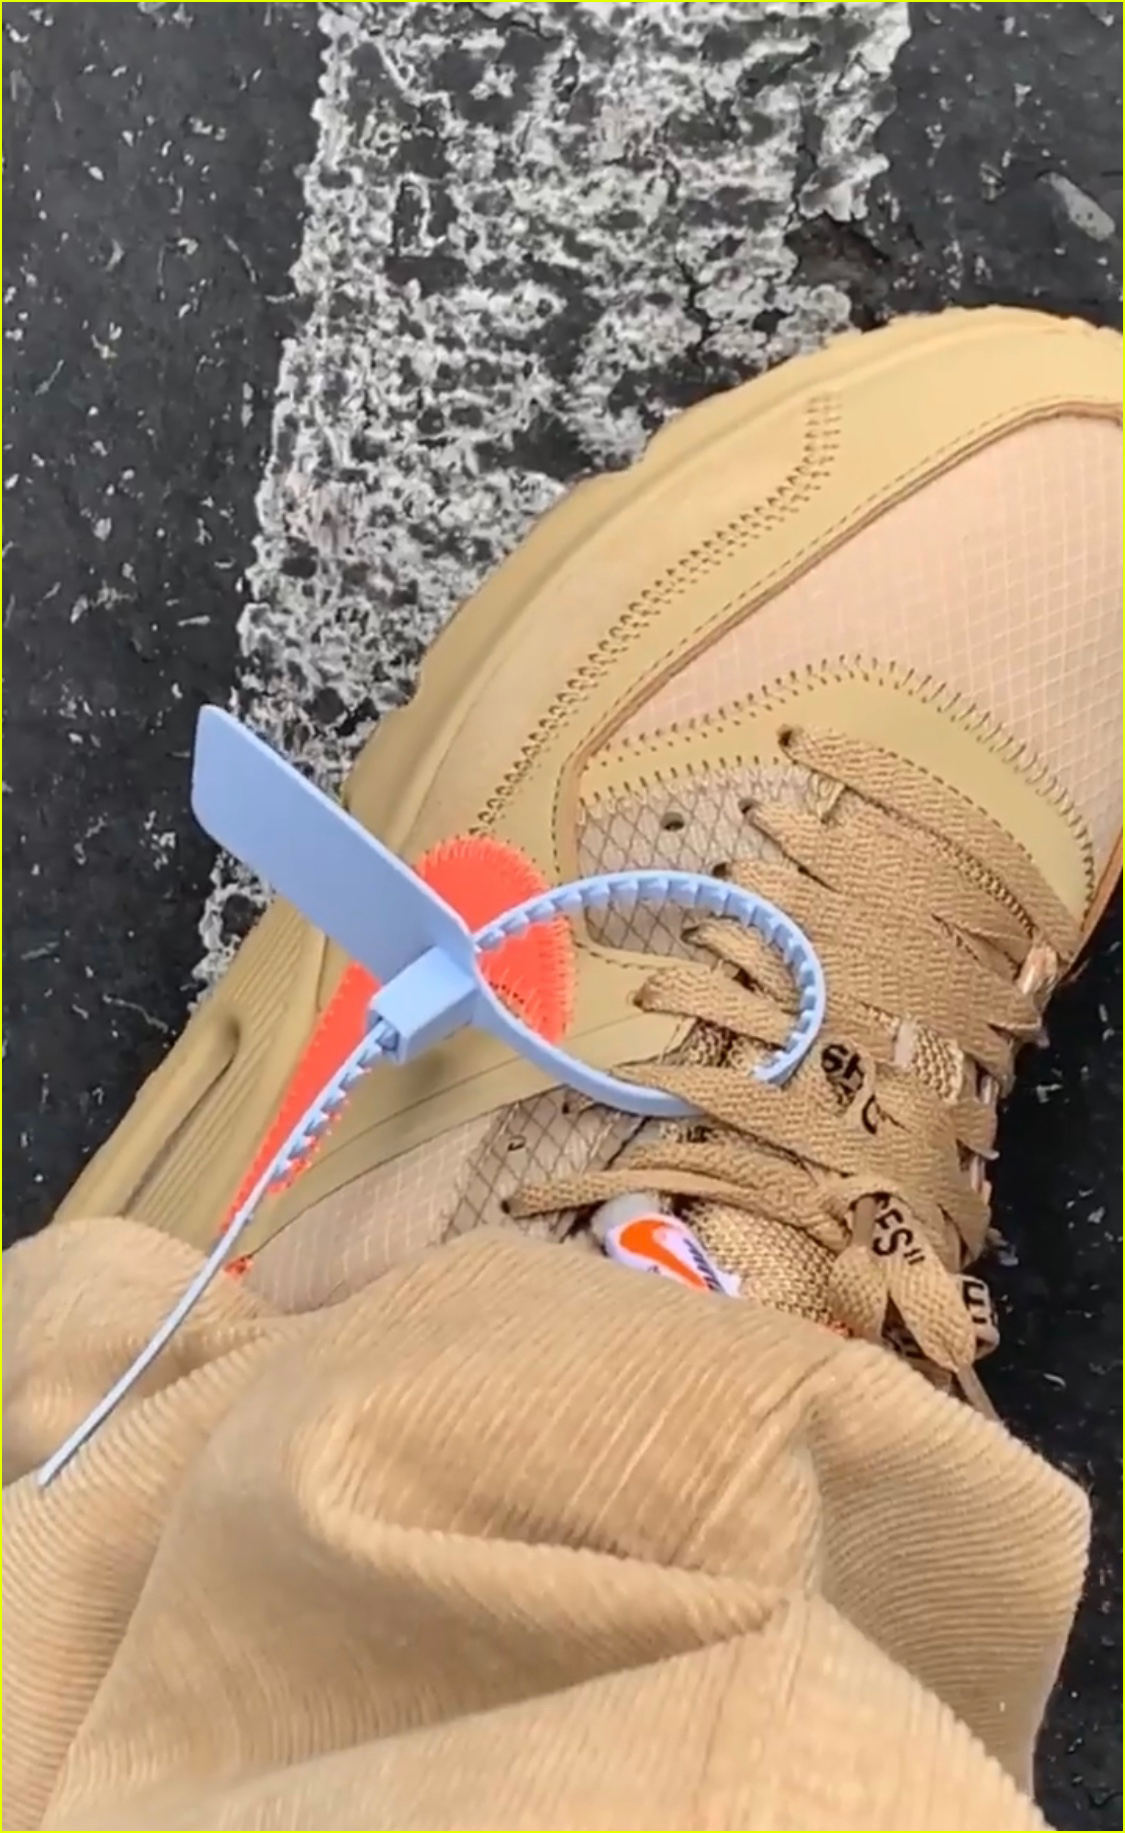 justin bieber laughs off police questioning security tag on his sneaker 04